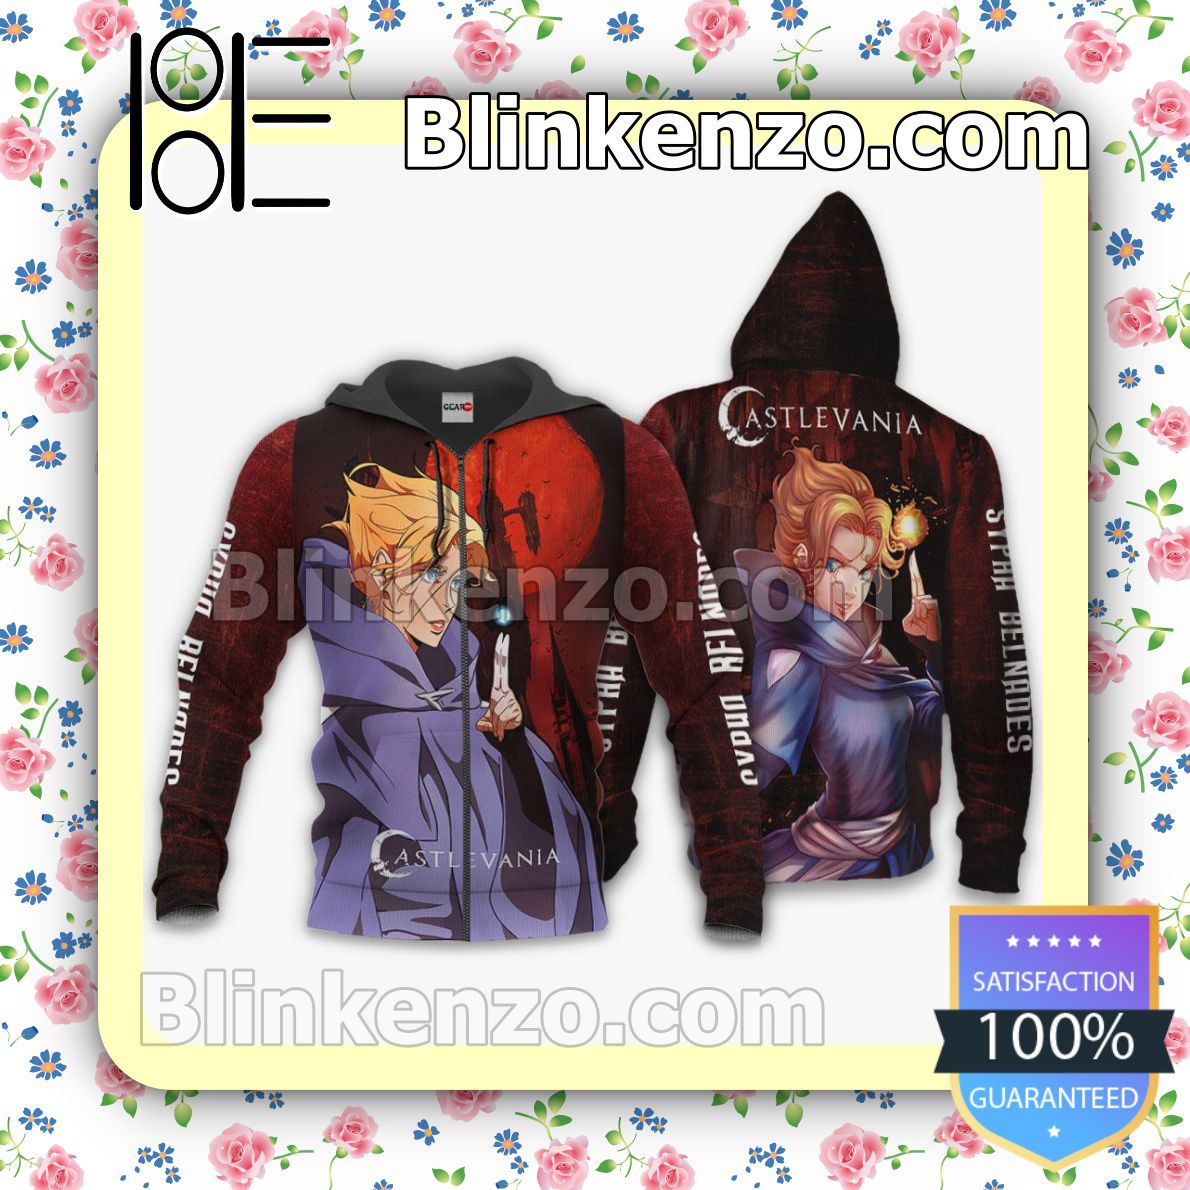 Castlevania Sypha Belnades Anime Merch Stores Personalized T-shirt, Hoodie, Long Sleeve, Bomber Jacket